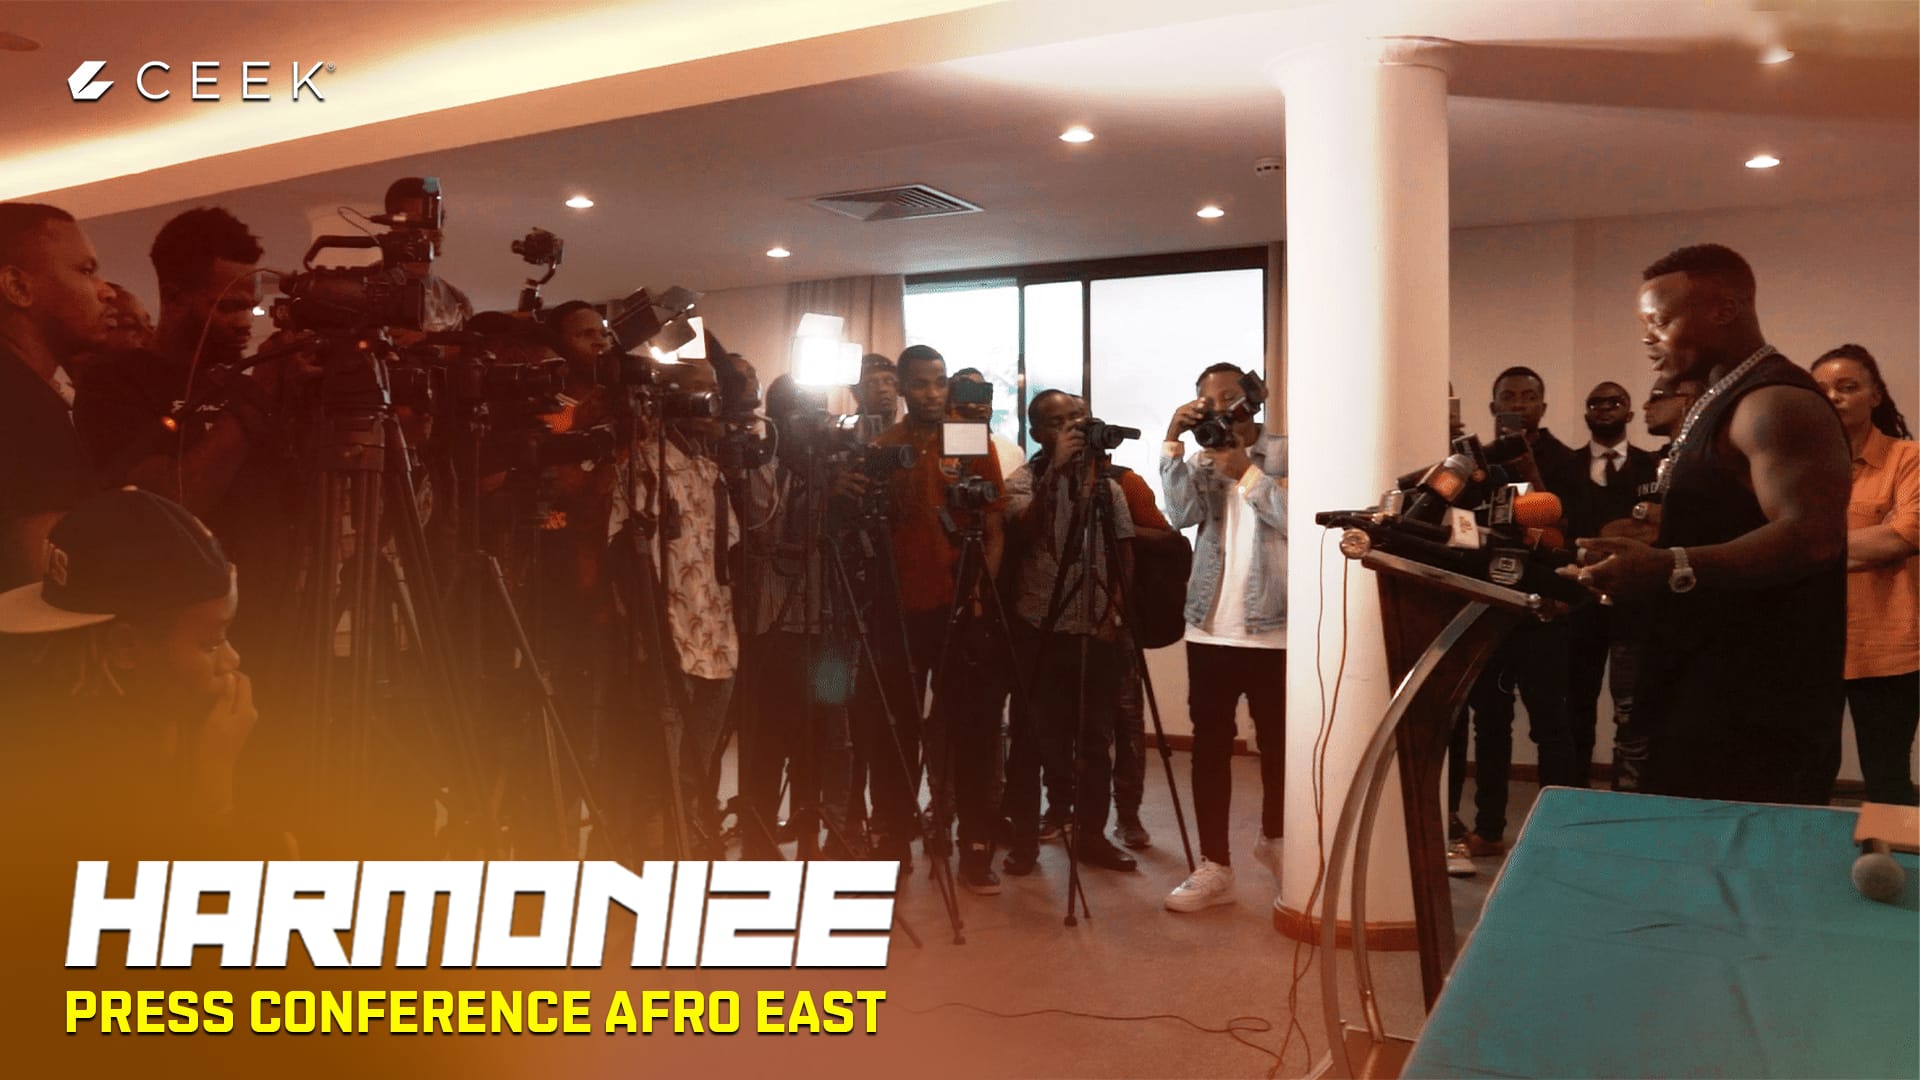 PRESS CONFERENCE AFRO EAST ceek.com